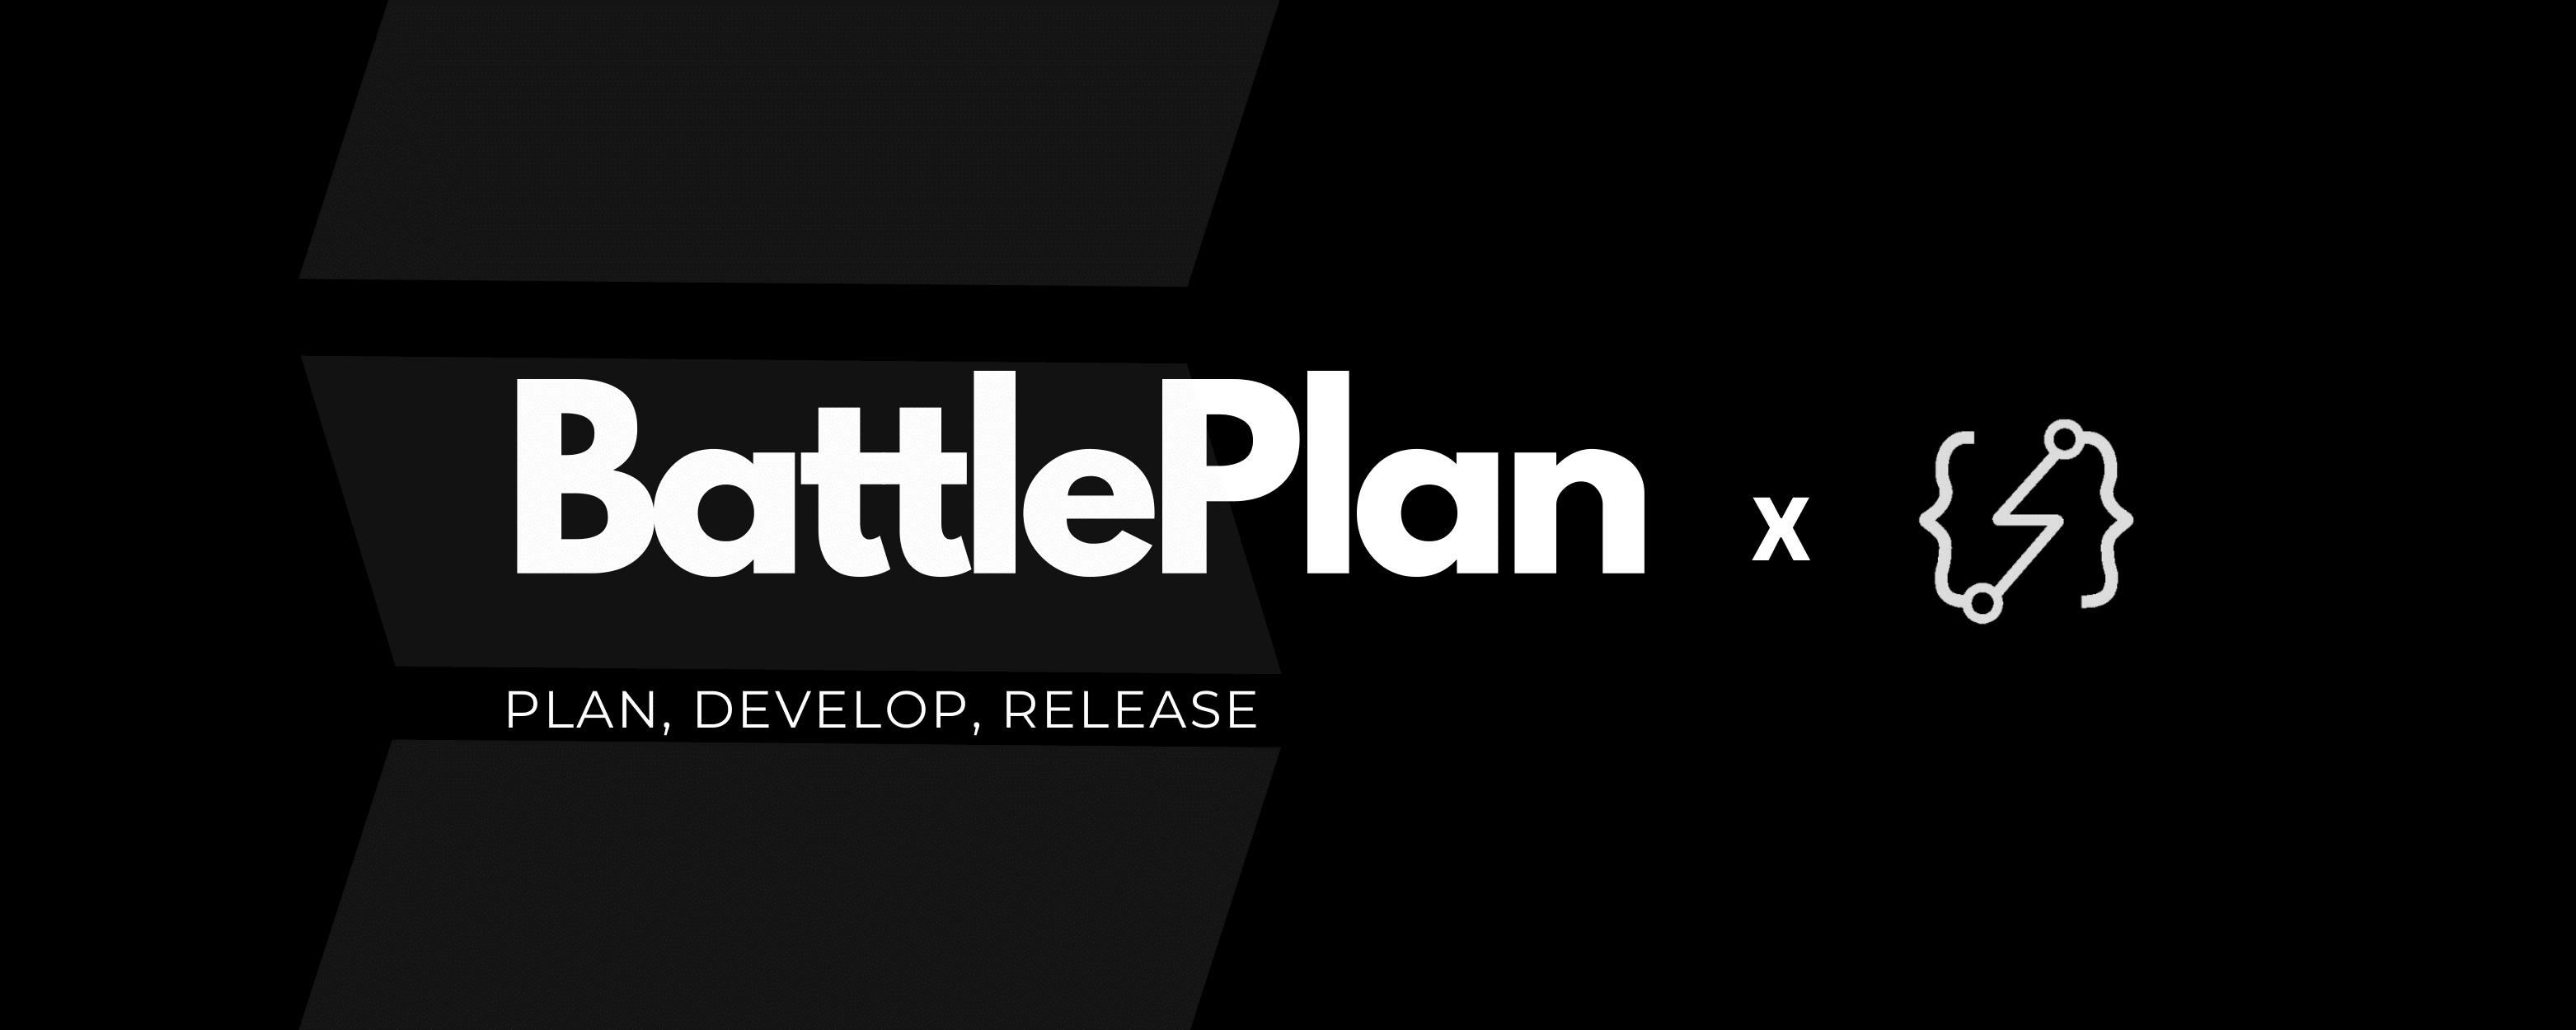 BattlePlan - Notion Template for Developers with Tight Deadlines